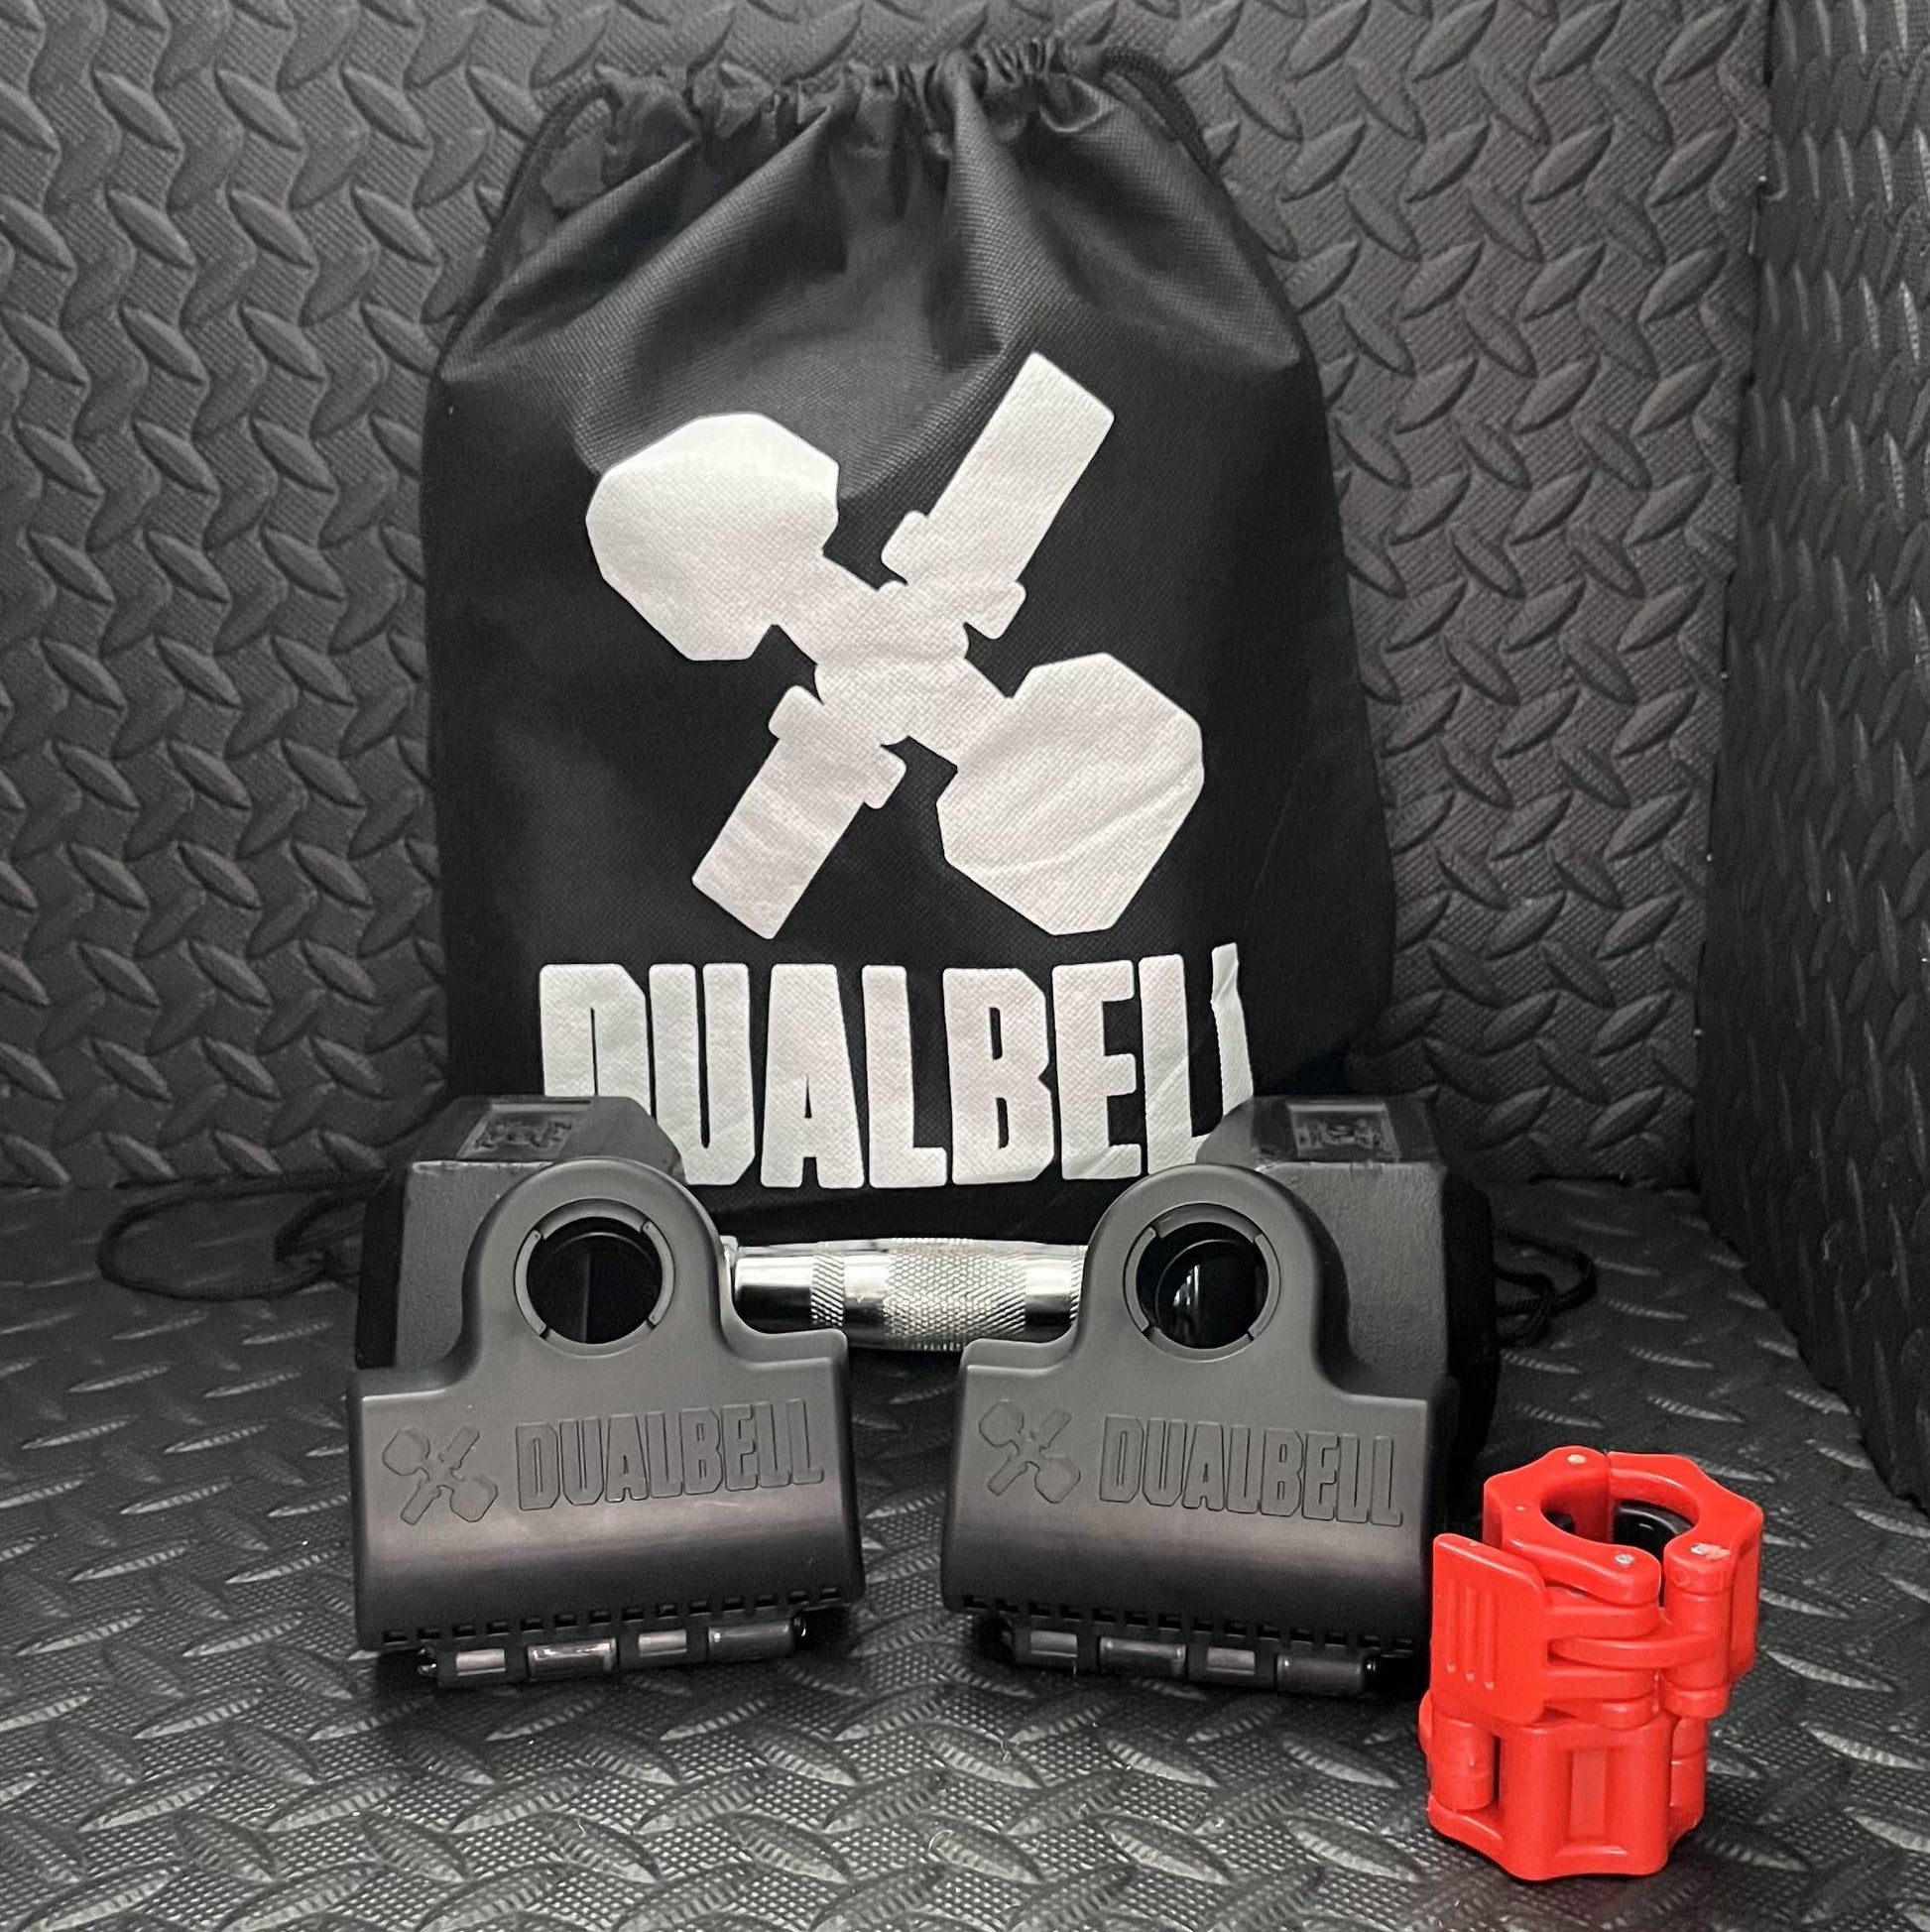 Dualbell Pair & Weight Clamps Bundle- Dumbbell to Barbell Connectors